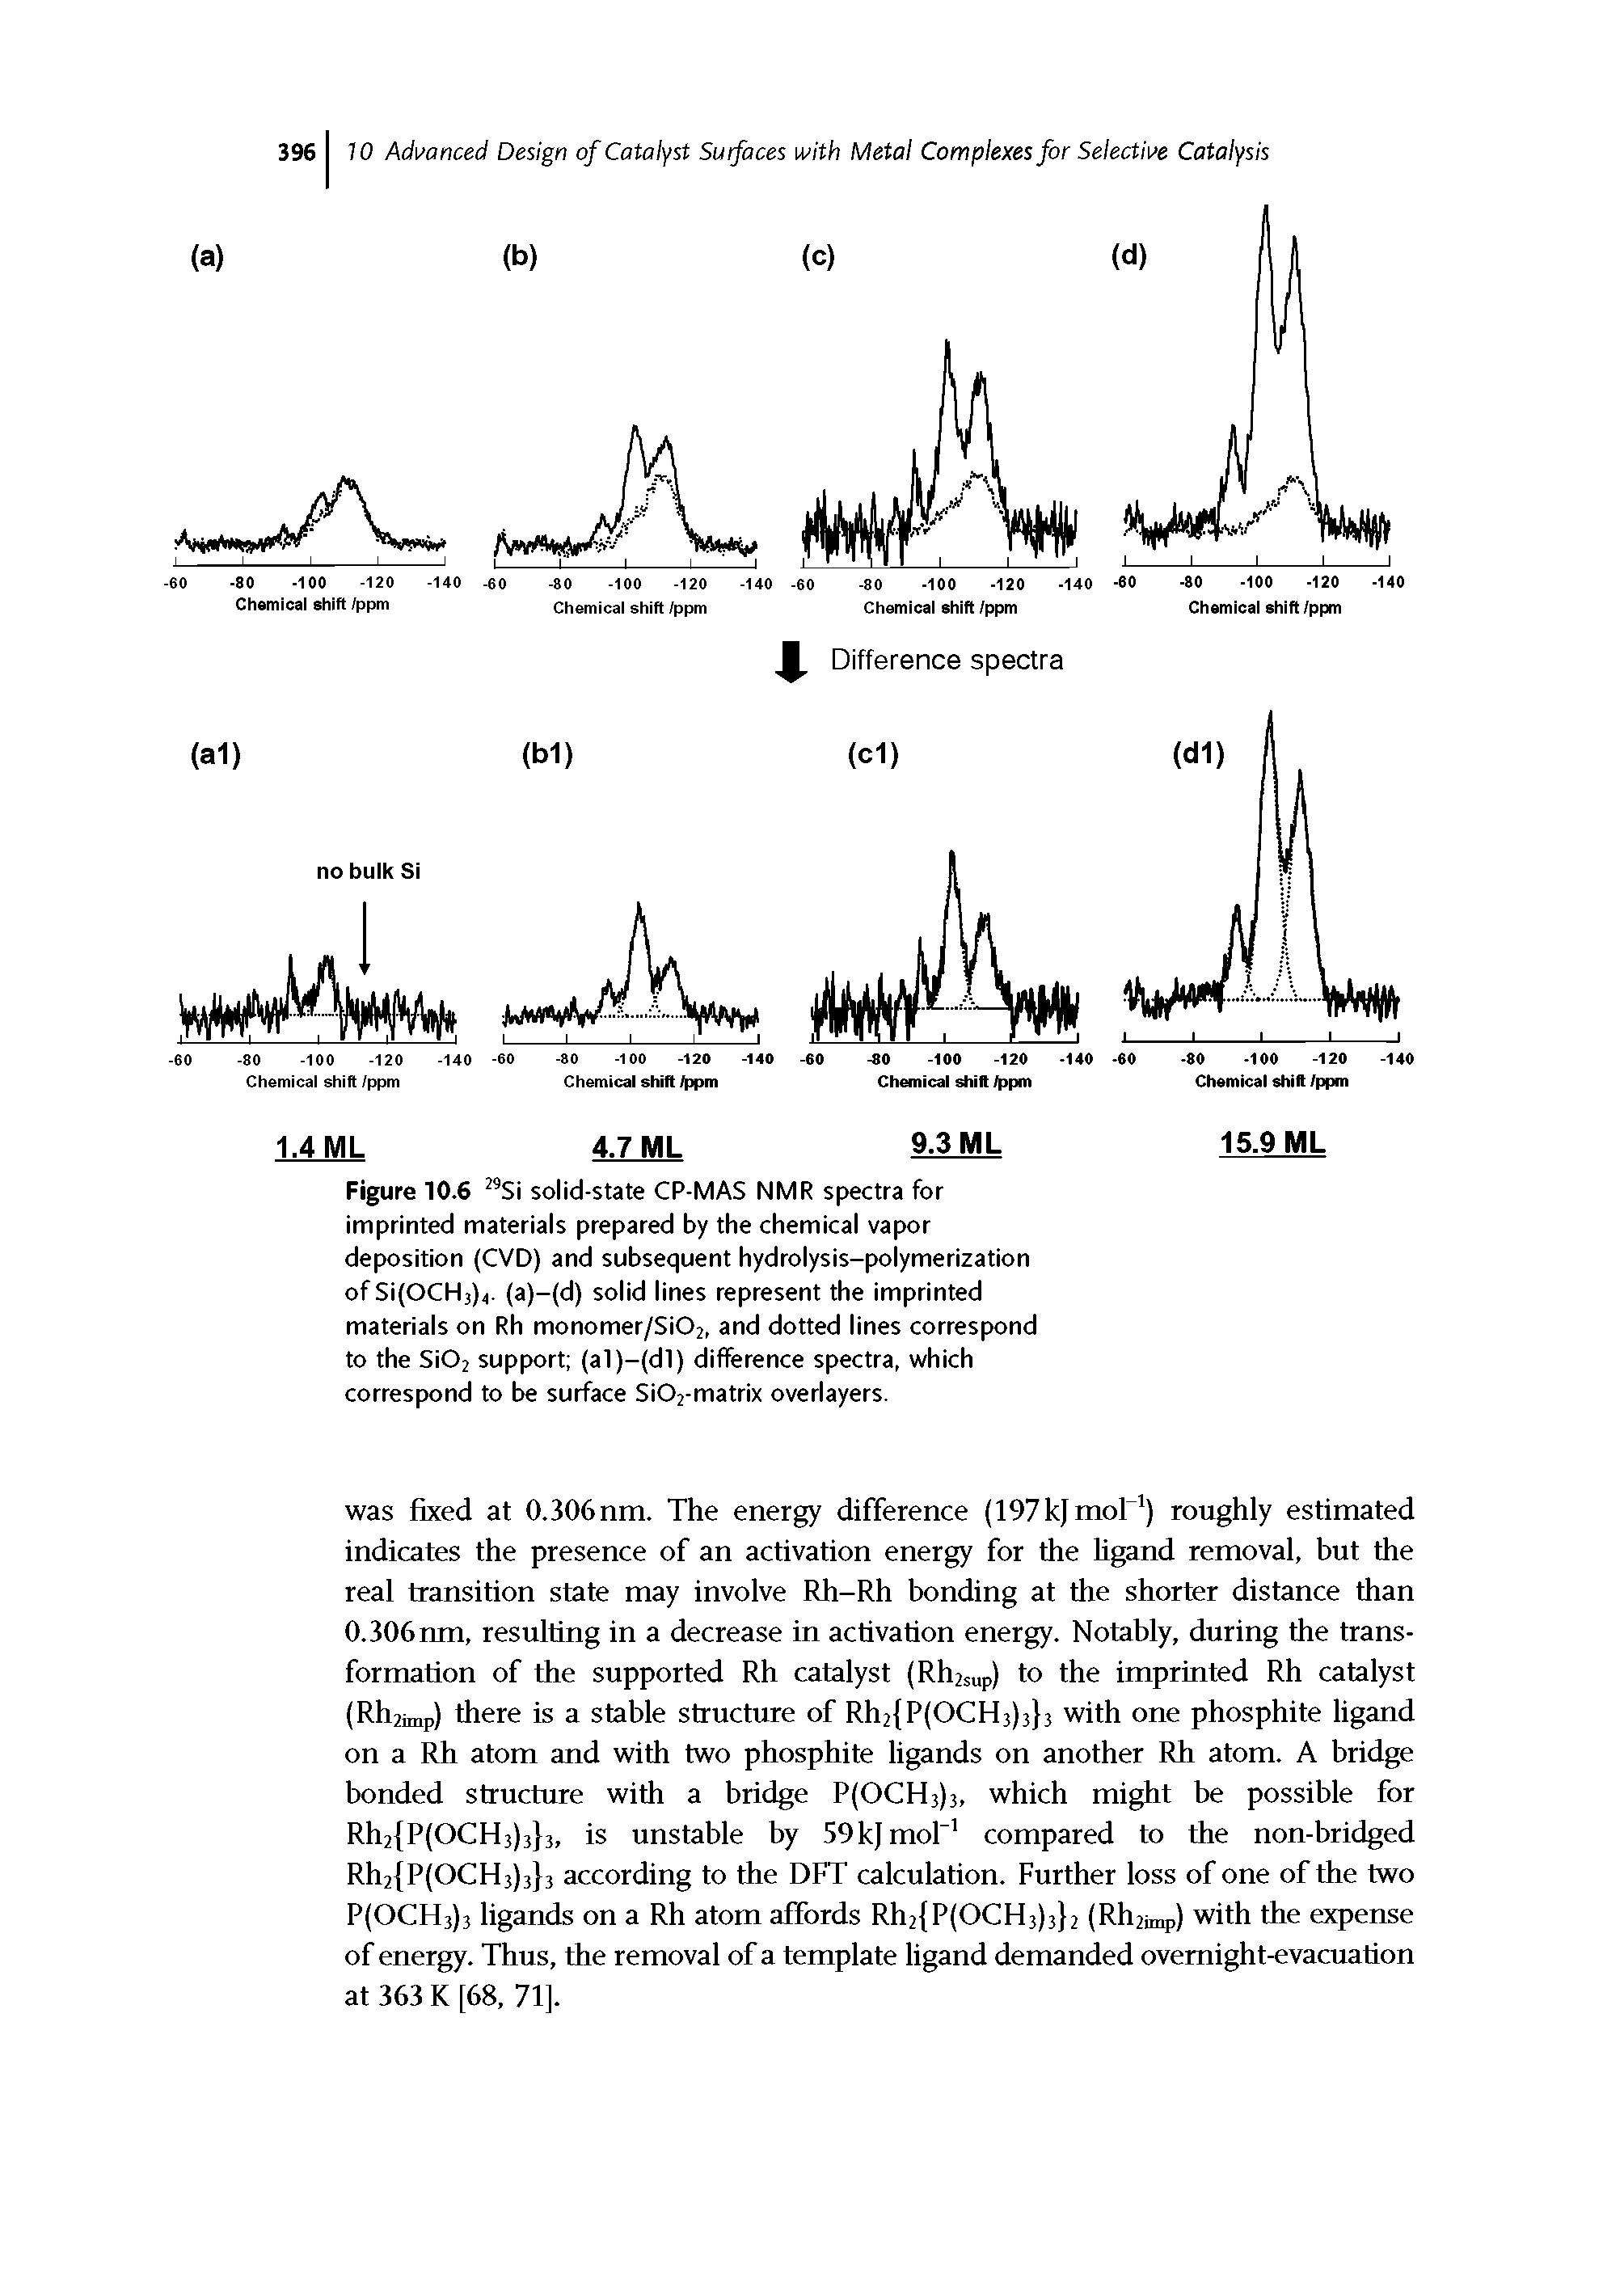 Figure 10.6 Si solid-state CP-MAS NMR spectra for imprinted materials prepared by the chemical vapor deposition (CVD) and subsequent hydrolysis-polymerization of SifOCHs). (a)-(d) solid lines represent the imprinted materials on Rh monomer/Si02, and dotted lines correspond to the Si02 support (al)-(dl) difference spectra, which correspond to be surface Si02-matrix overlayers.